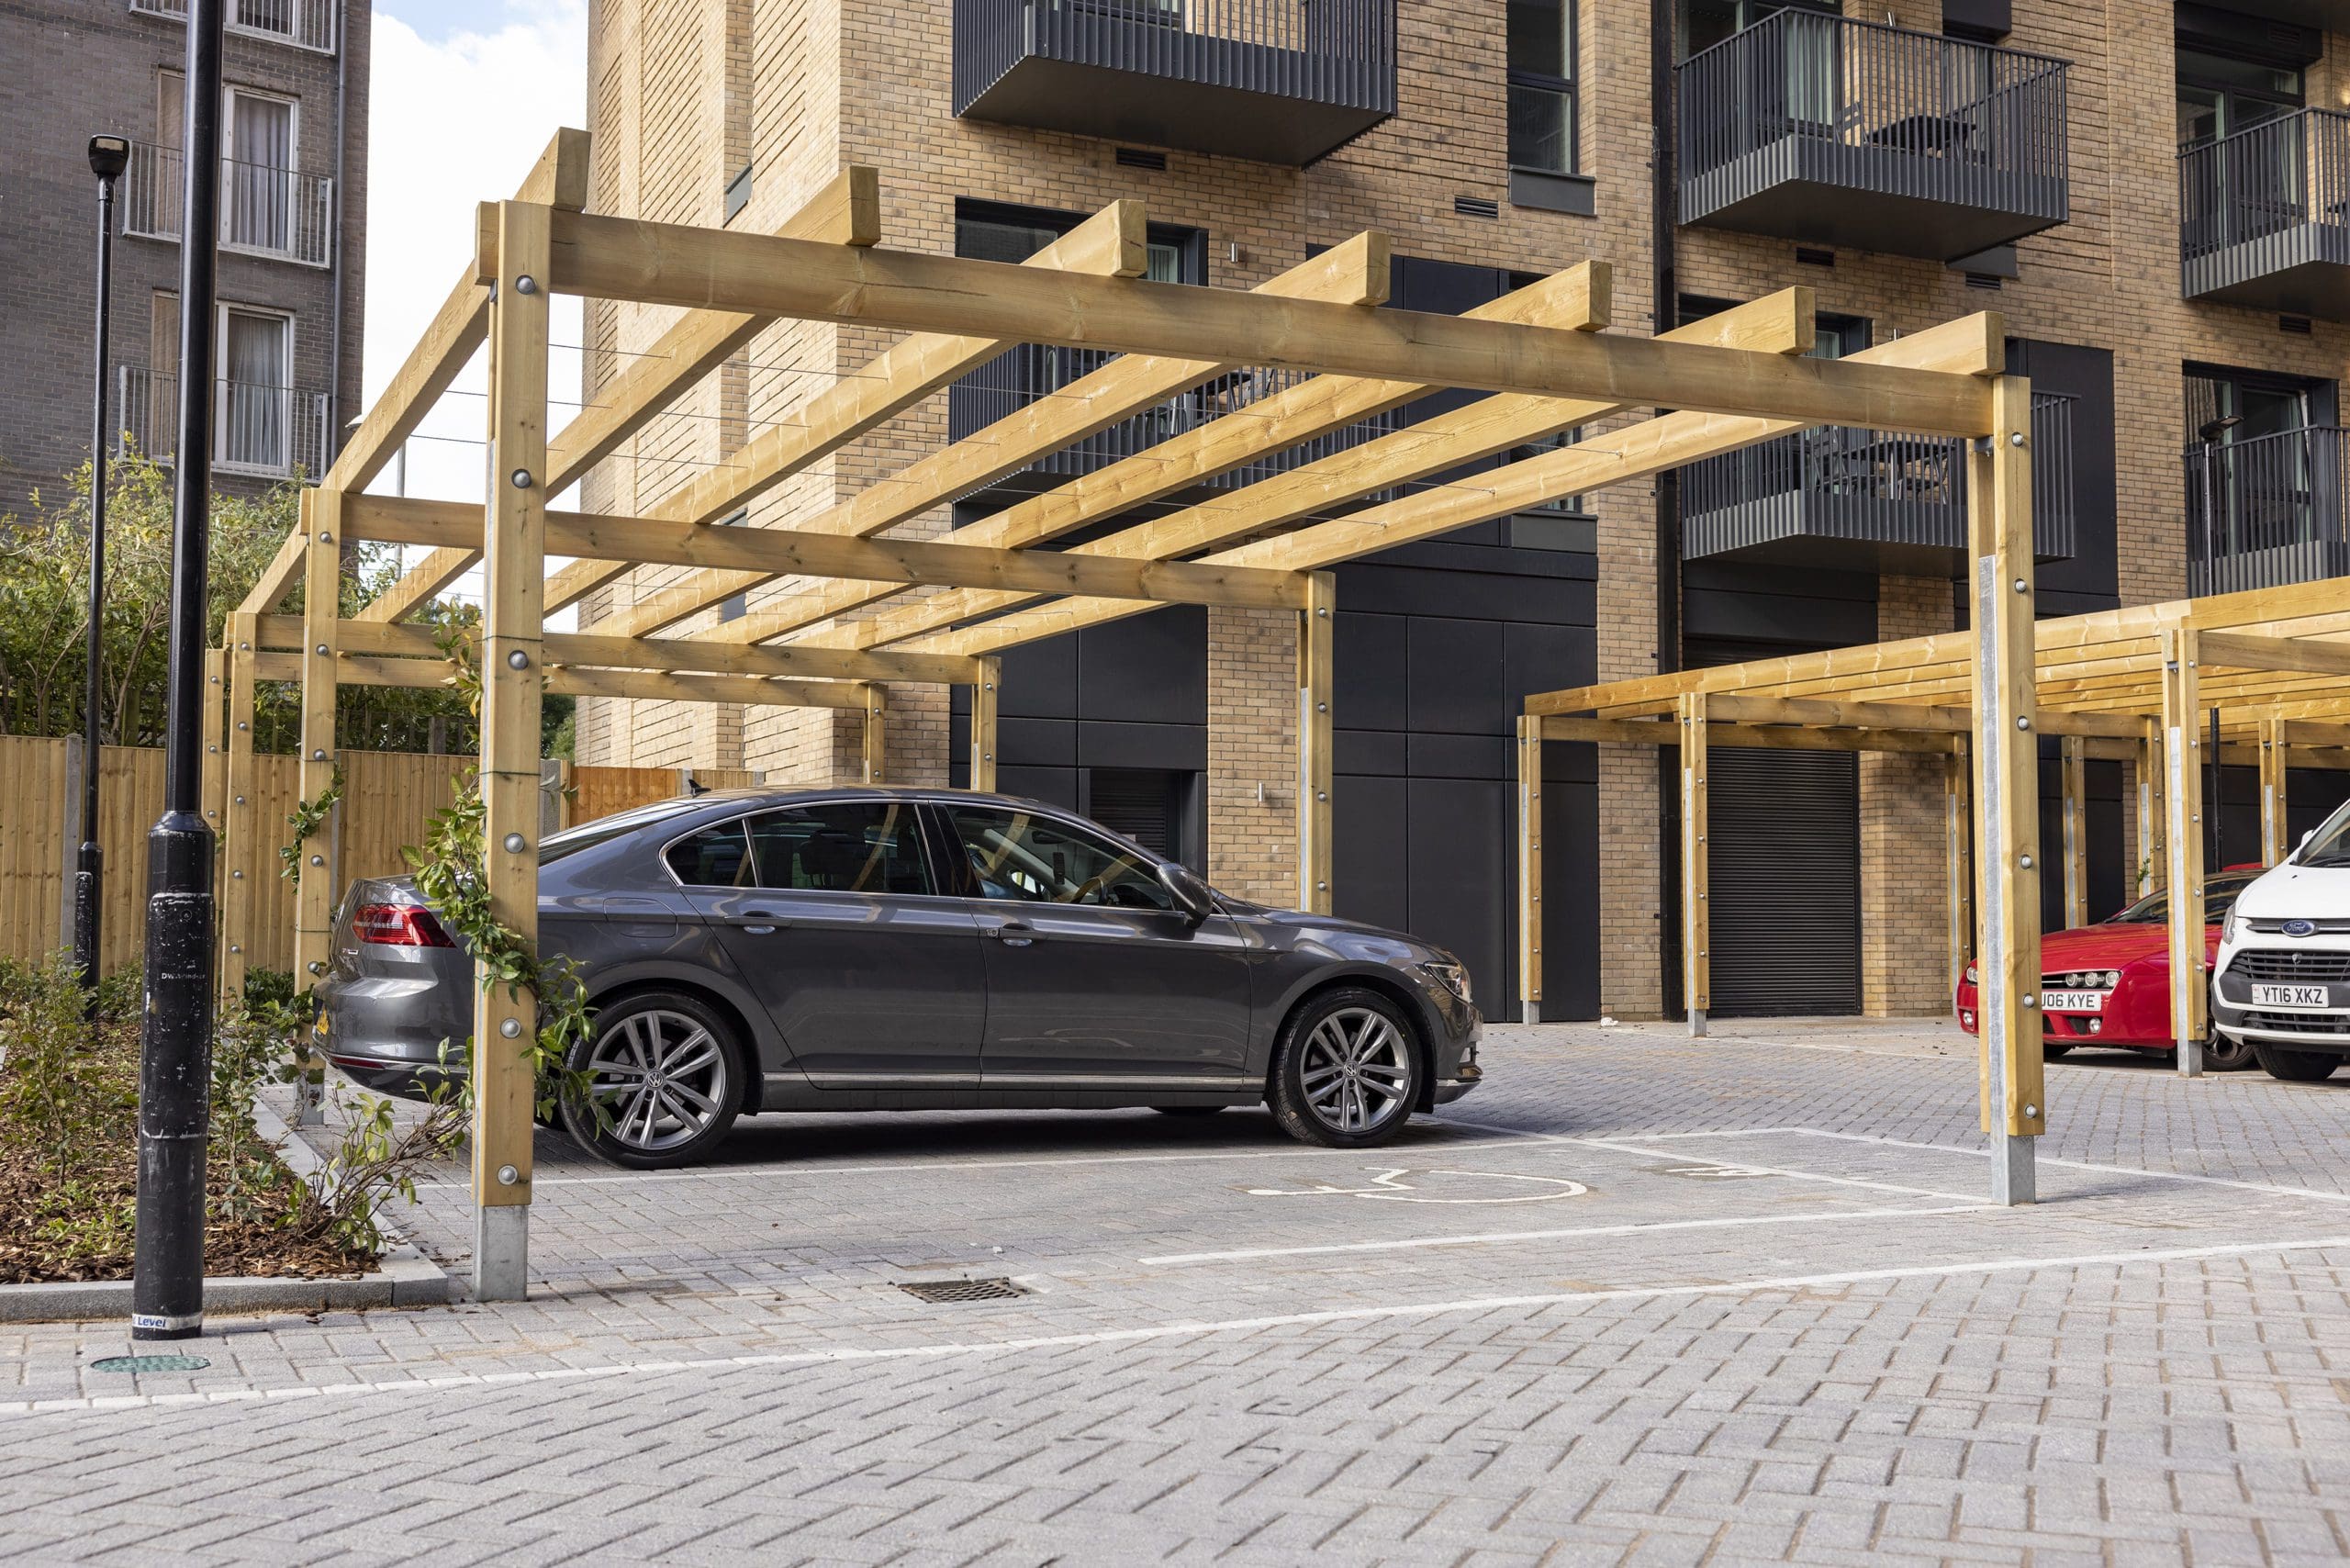 collection-of-wooden-pergolas-covering-car-parking-spaces-outside